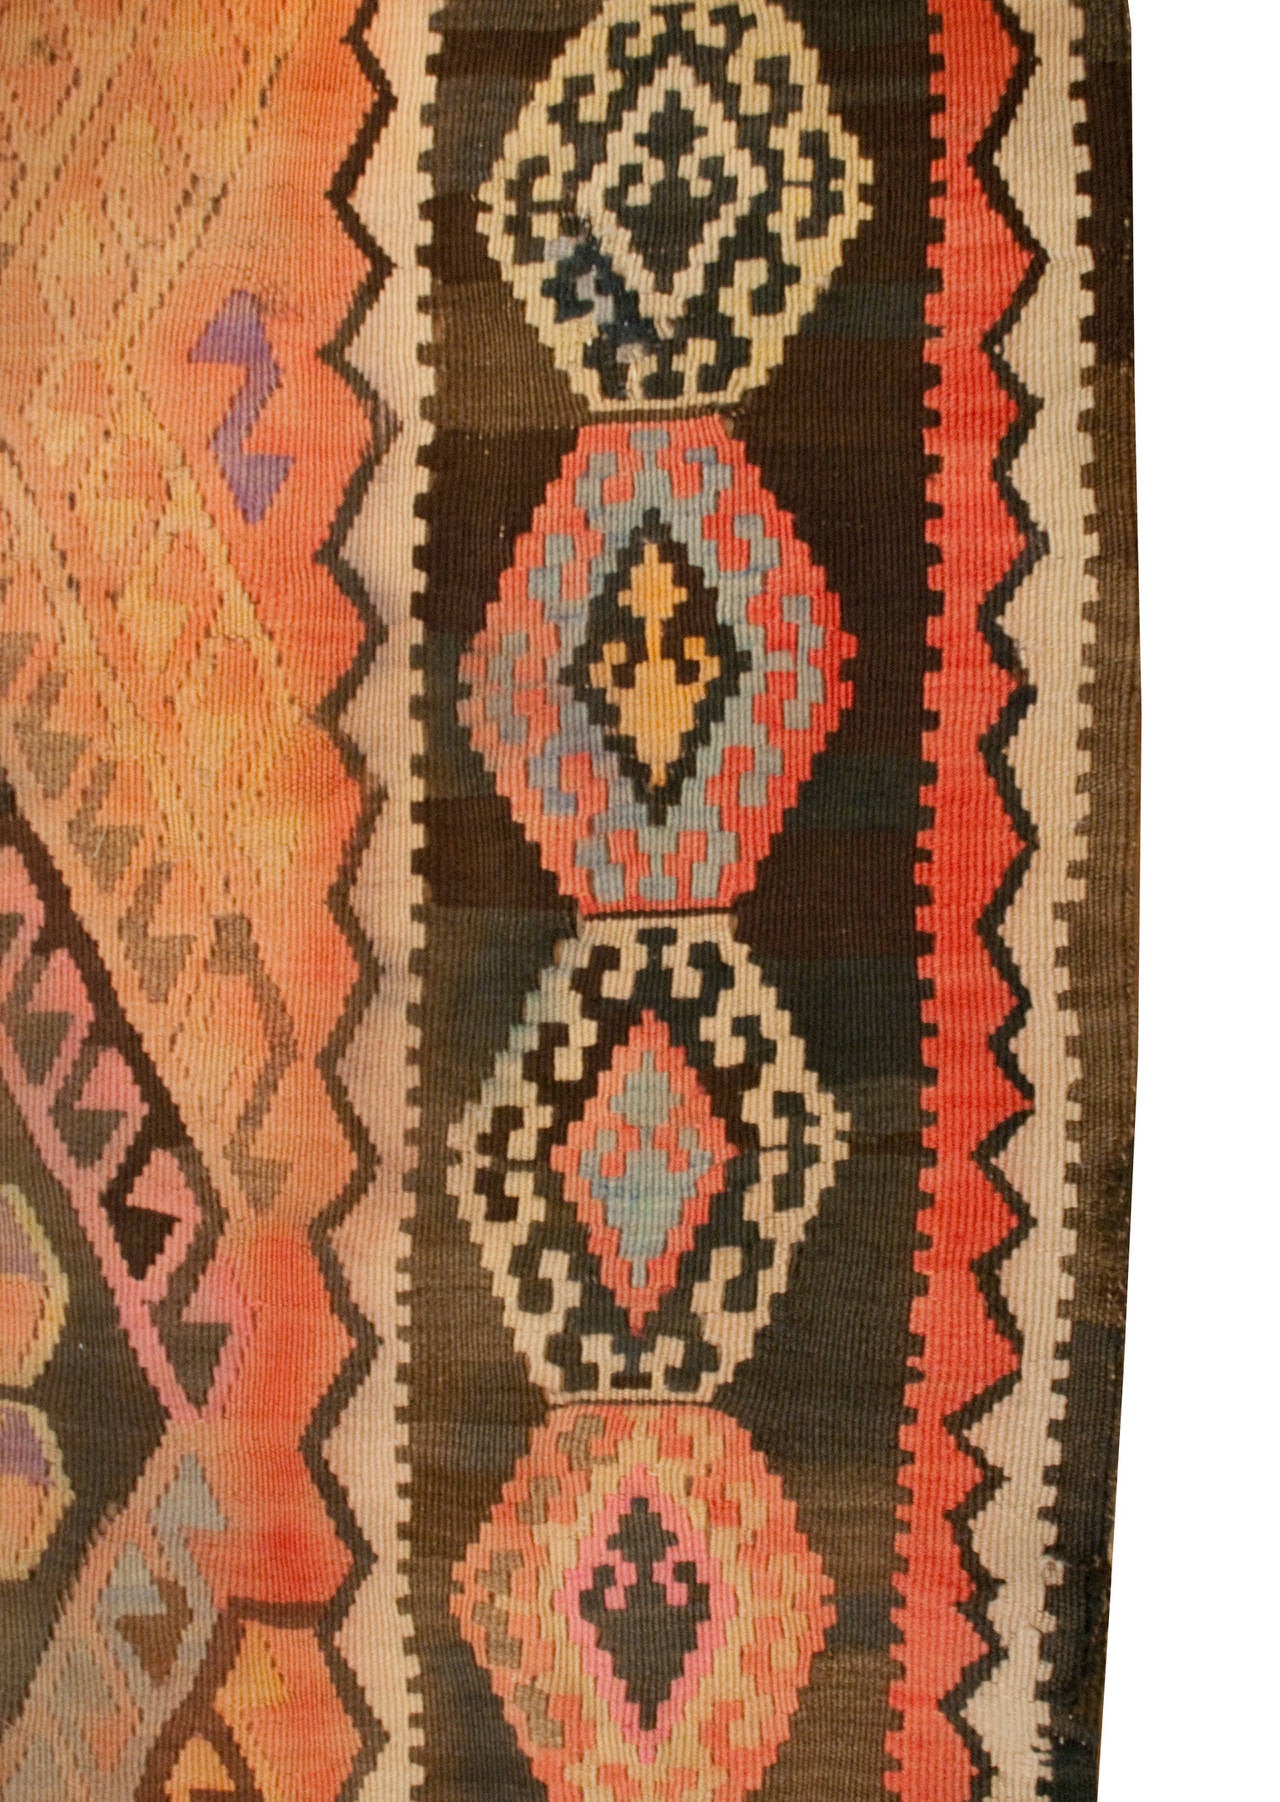 An early 20th century Anatolian Turkish Kilim runner with three large multicolored geometric central medallions, surrounded by multiple complementary geometric borders.